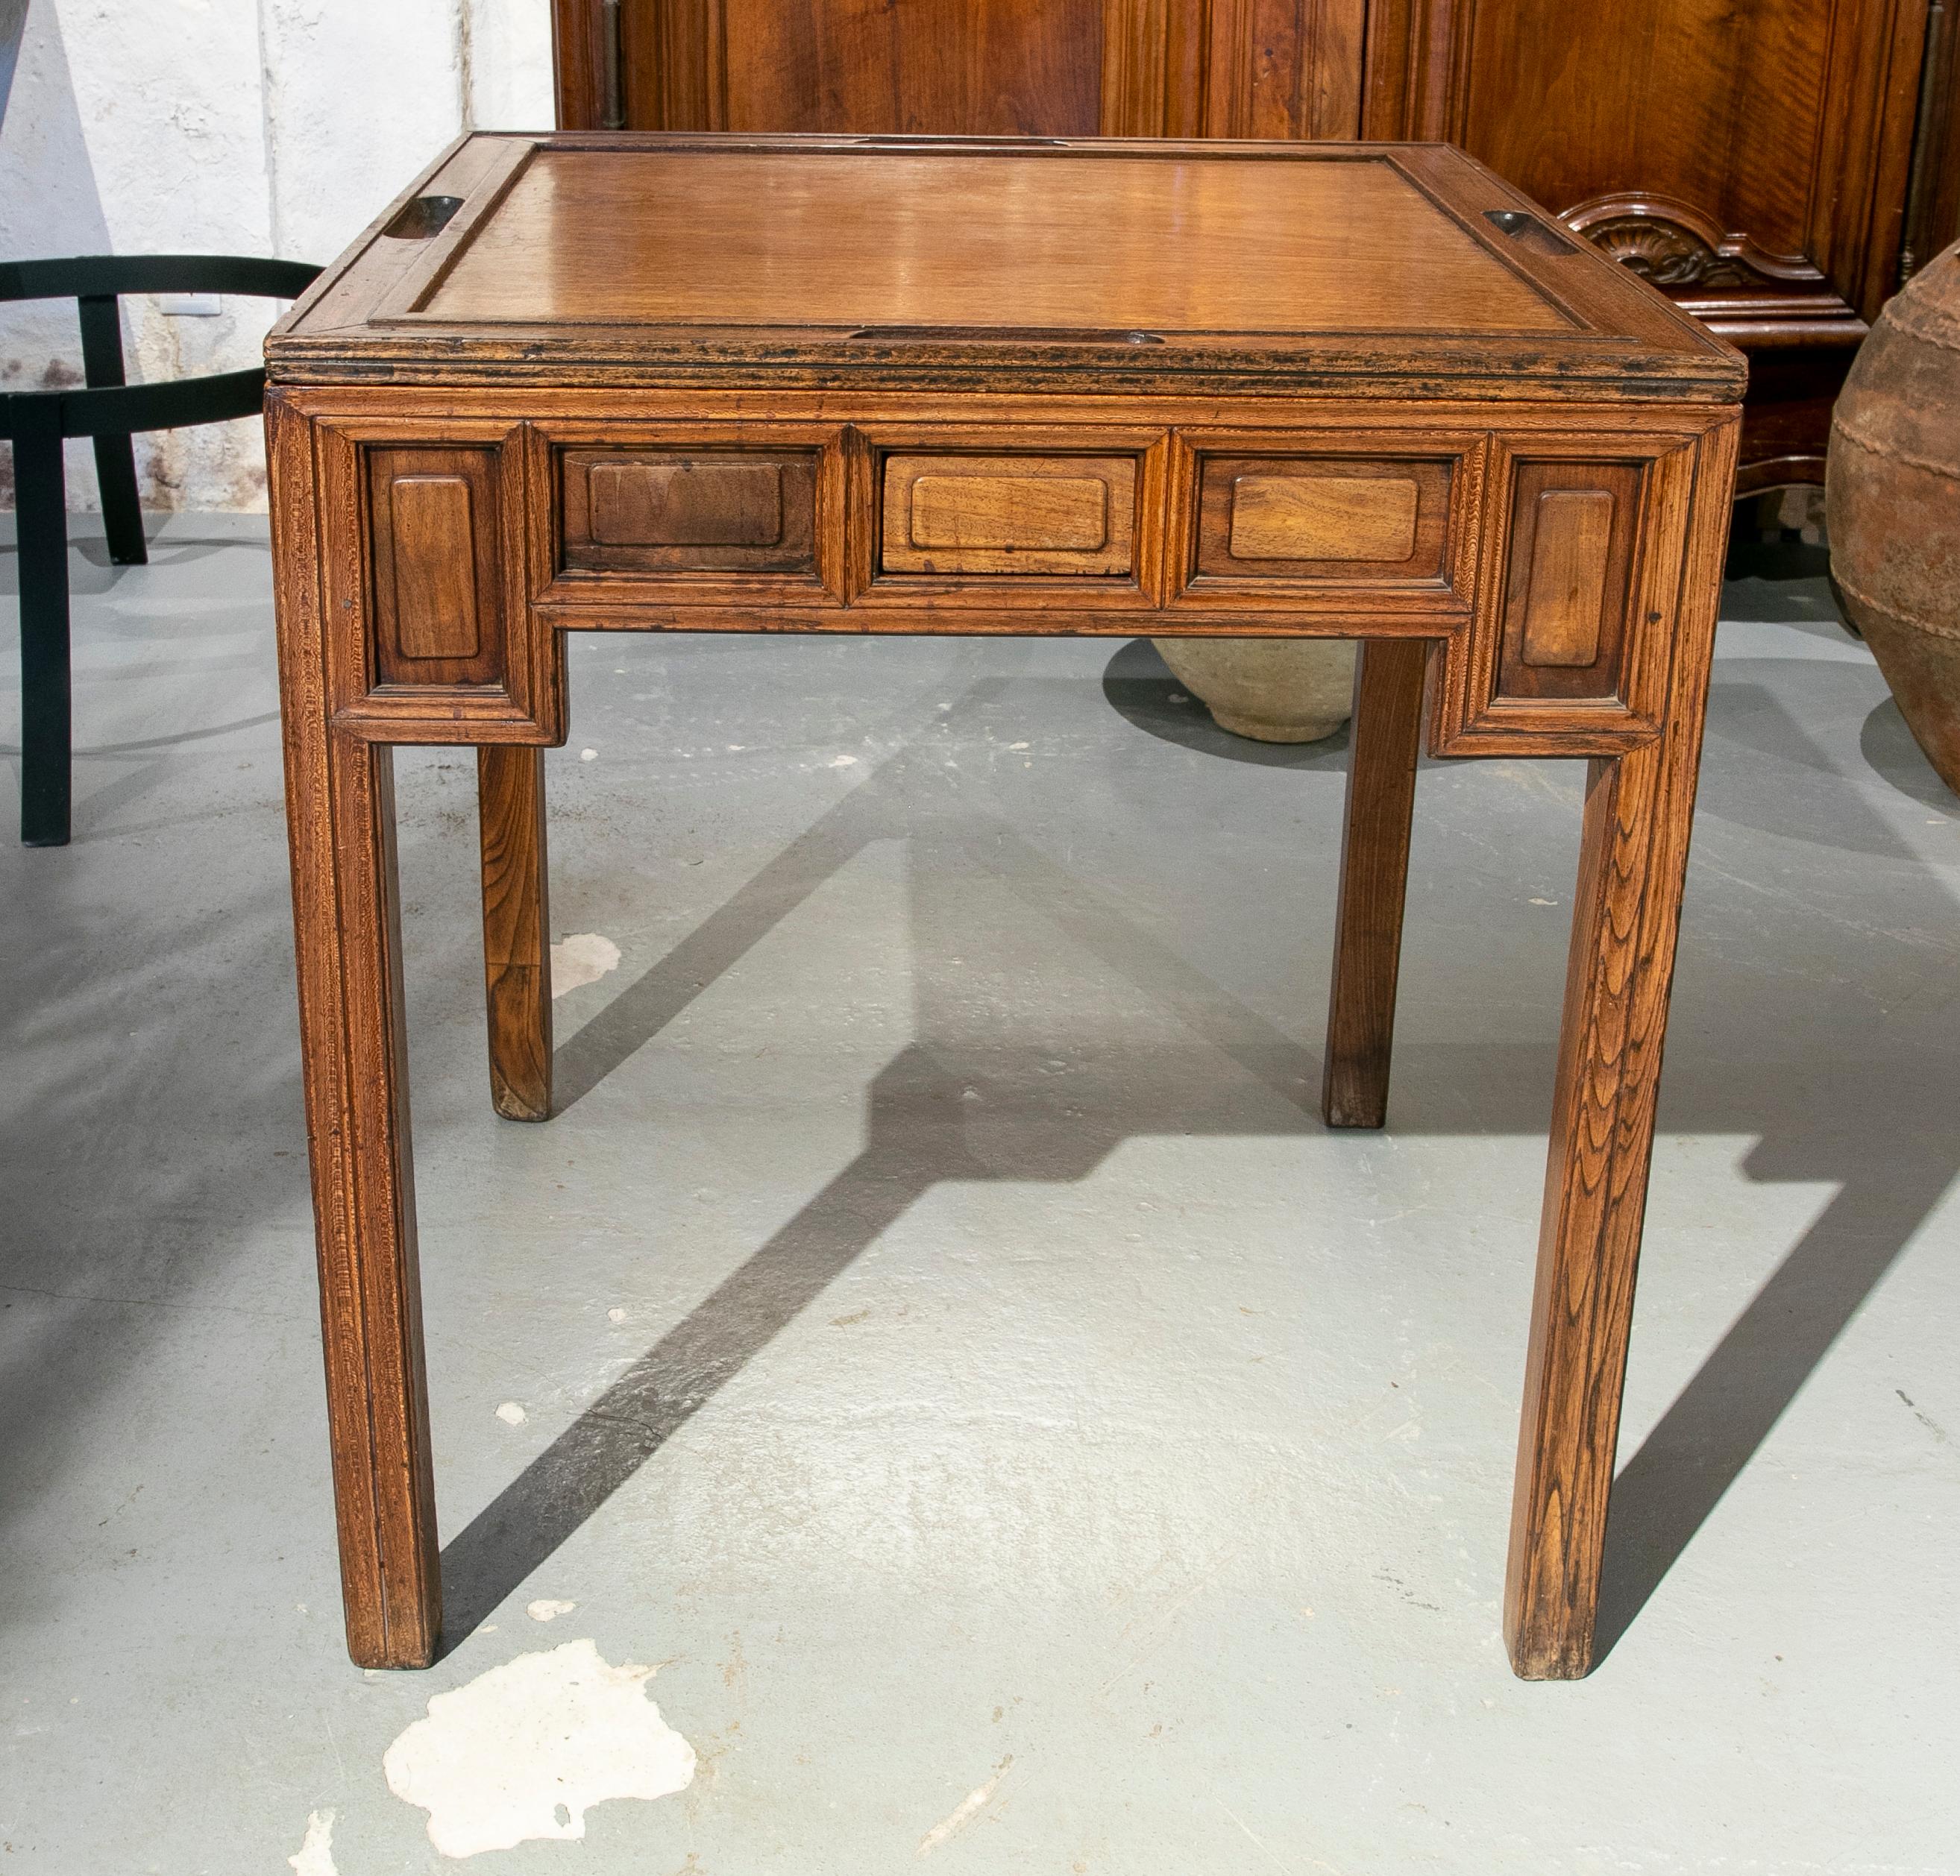 1930s Varnished Wooden Gaming Table with Drawers 

Note: One of the drawers is missing.